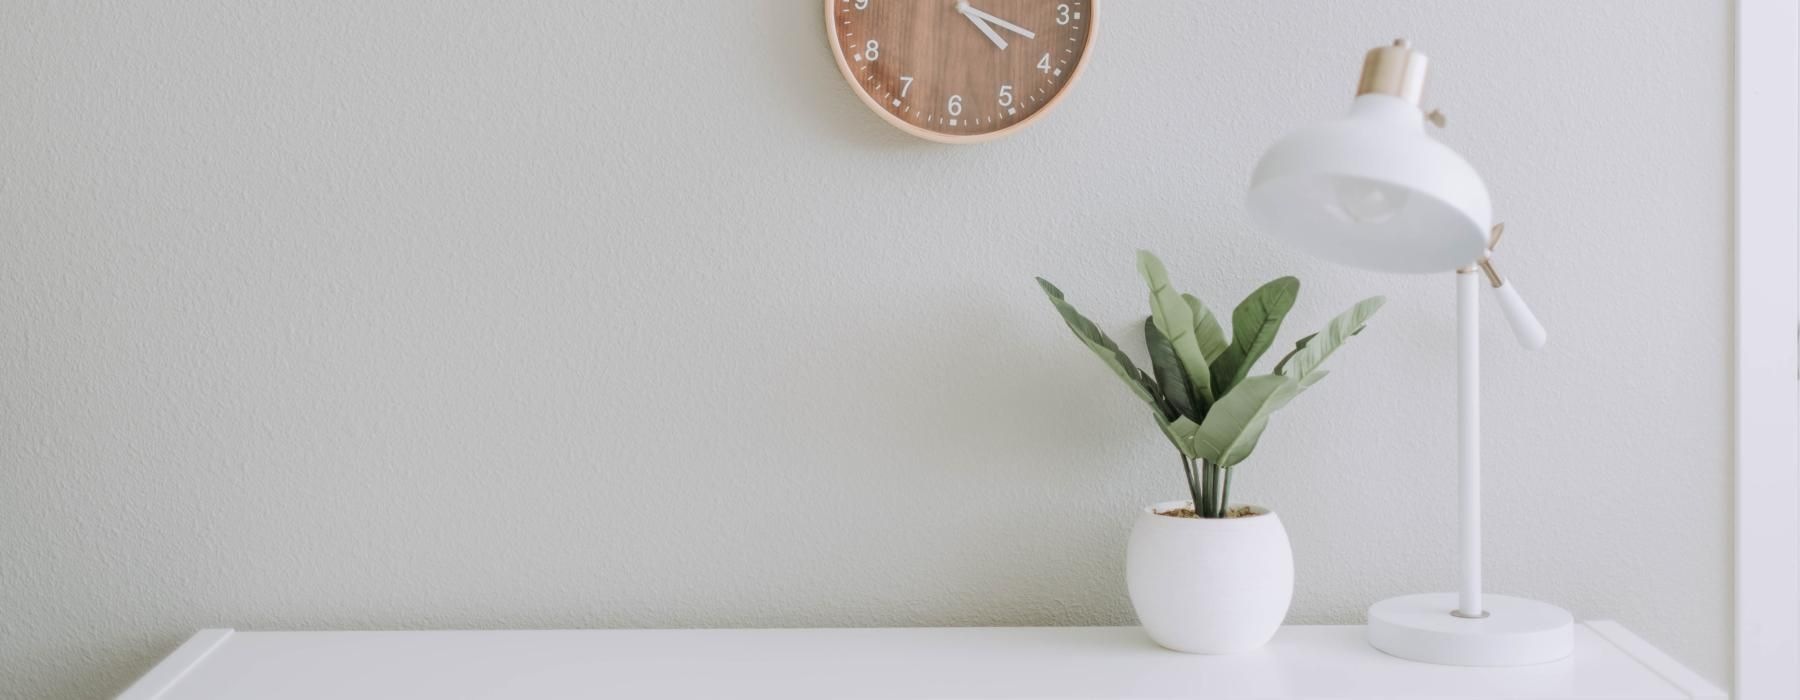 clock on a wall over a desk with a lamp and potted plant